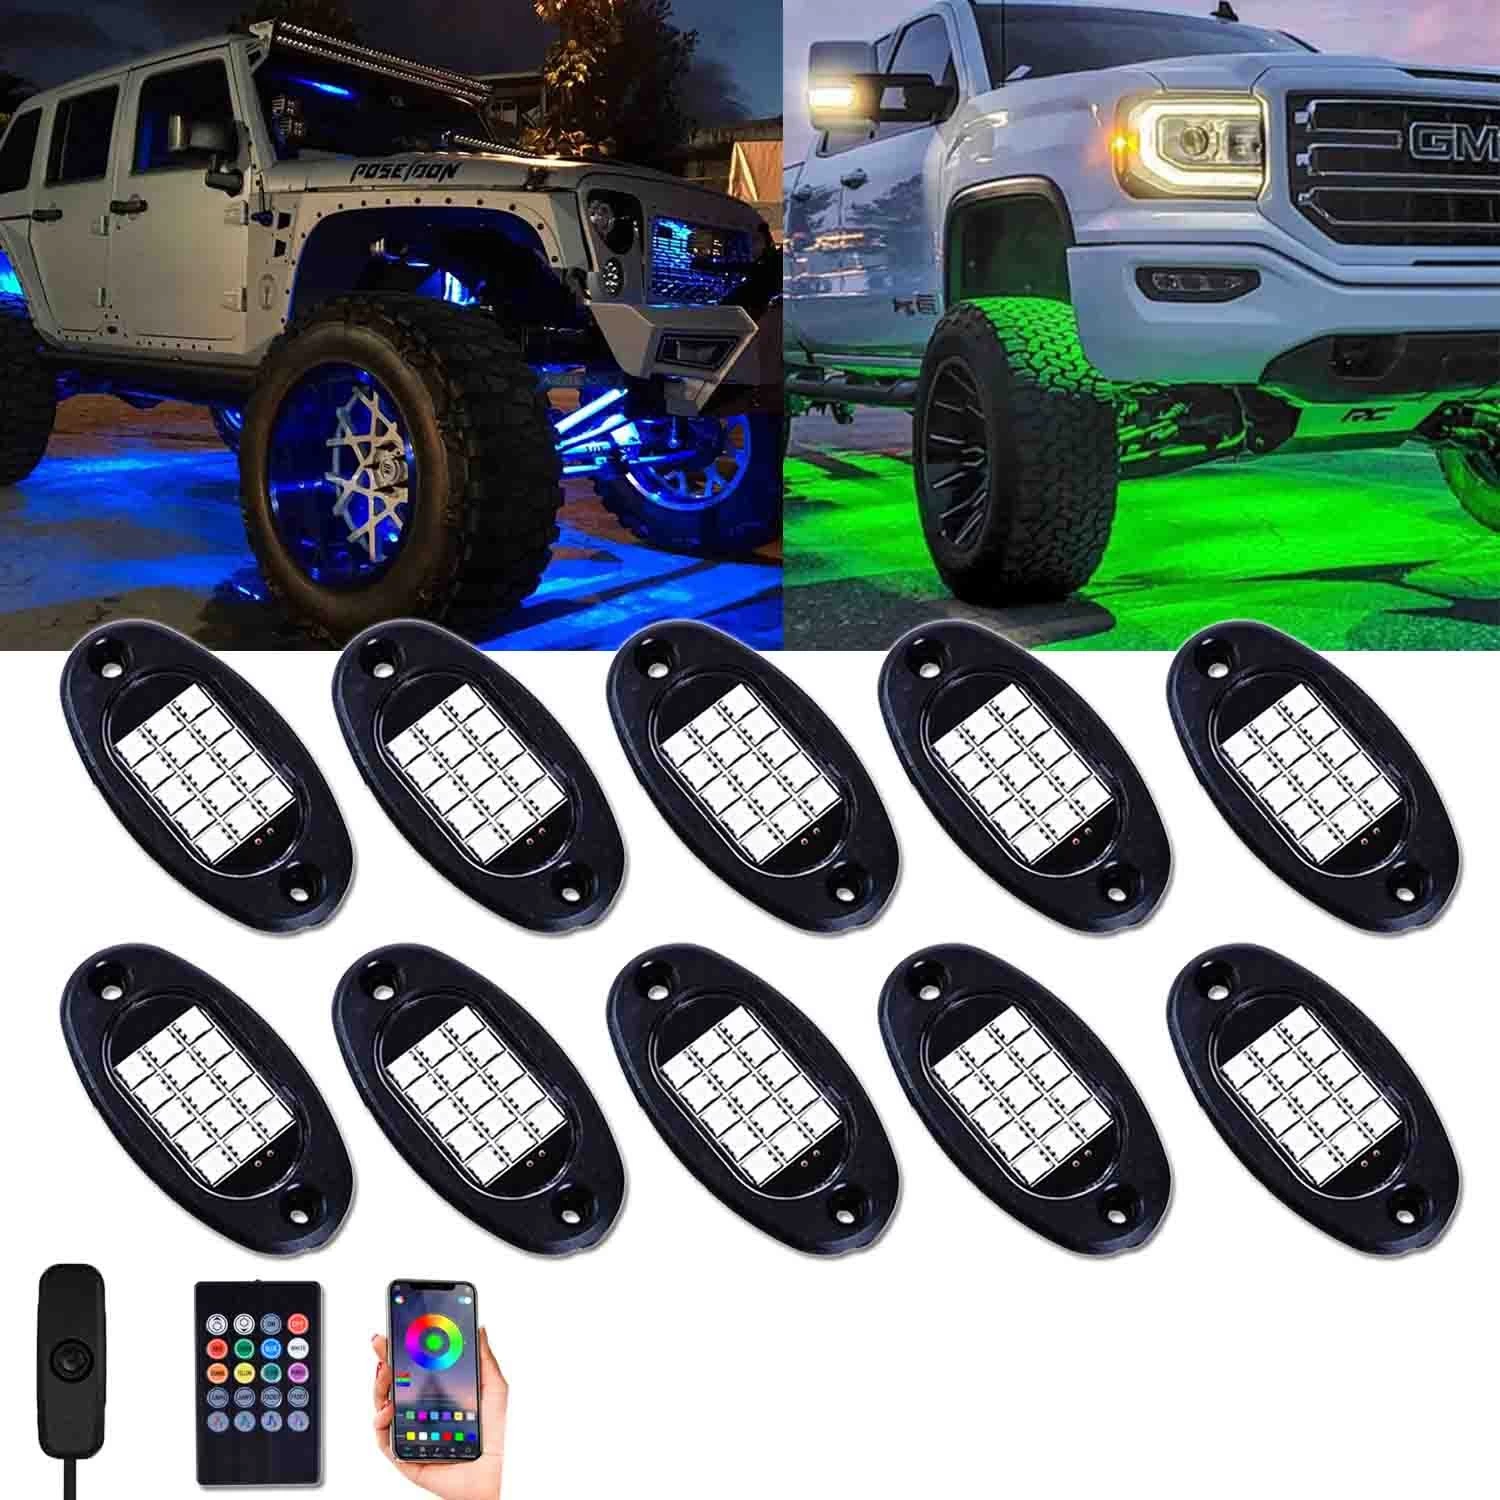 China Unionlux RGB LED Rock Lights 60 LEDs Multicolor Underglow Neon Lights Waterproof Aluminum Light Kit with RF/APP Control Music Mode Timing Function for Truck Jeep Off Road Car UTV ATV SUV 8 Packs fabricante